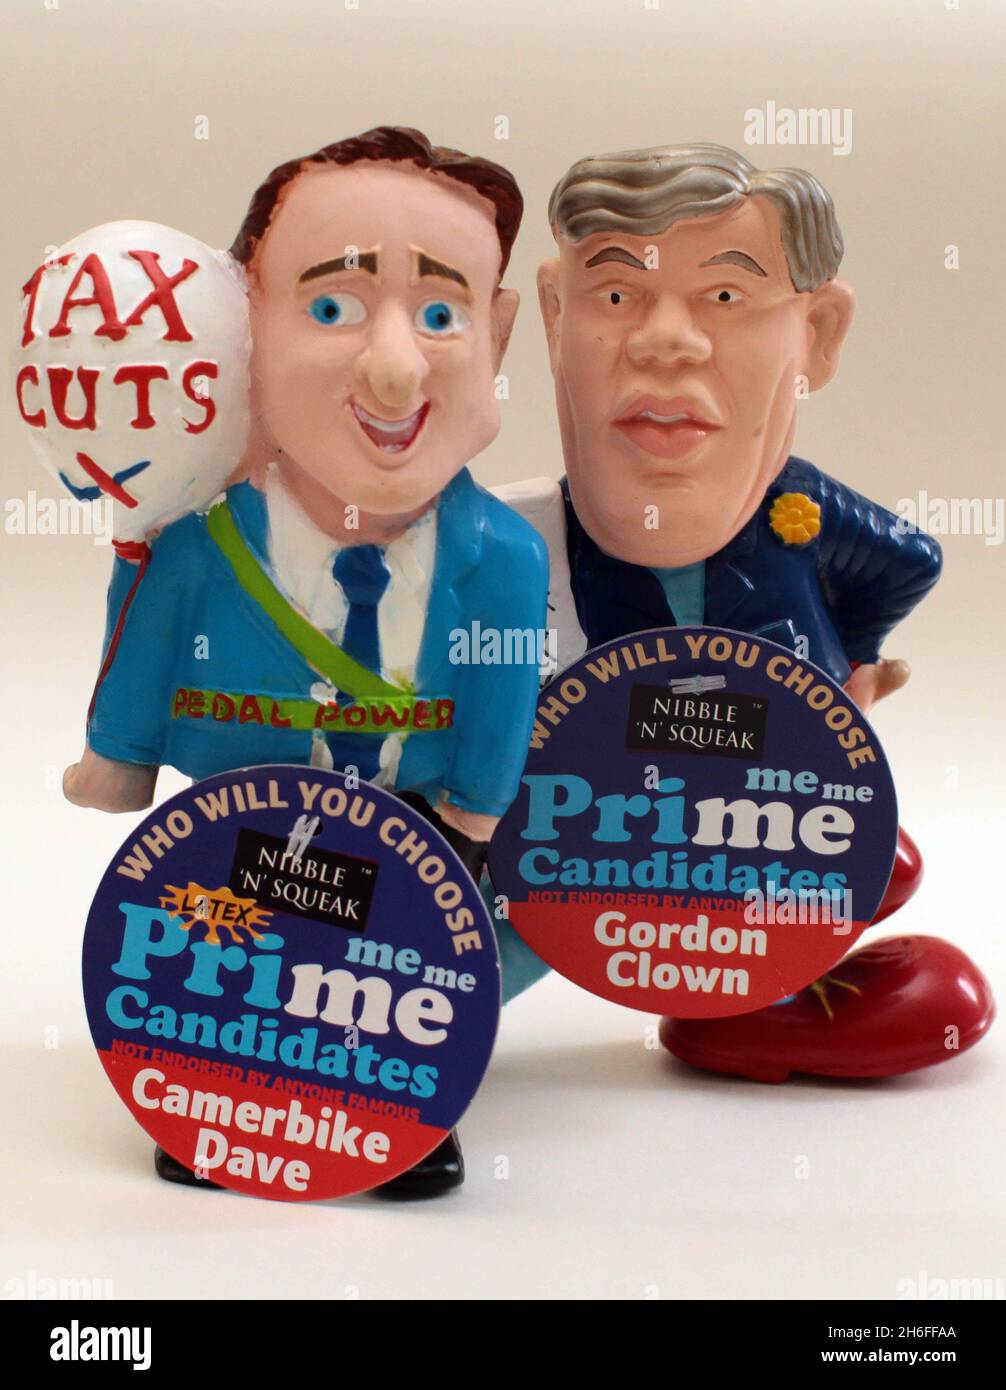 Pets At Home are now stocking political dog toys in the run up to the next election. The squeaky latex toys are based on Conservative Leader David Cameron and PM Gordon Brown, allowing the electorate to decide their dogs political party. Stock Photo